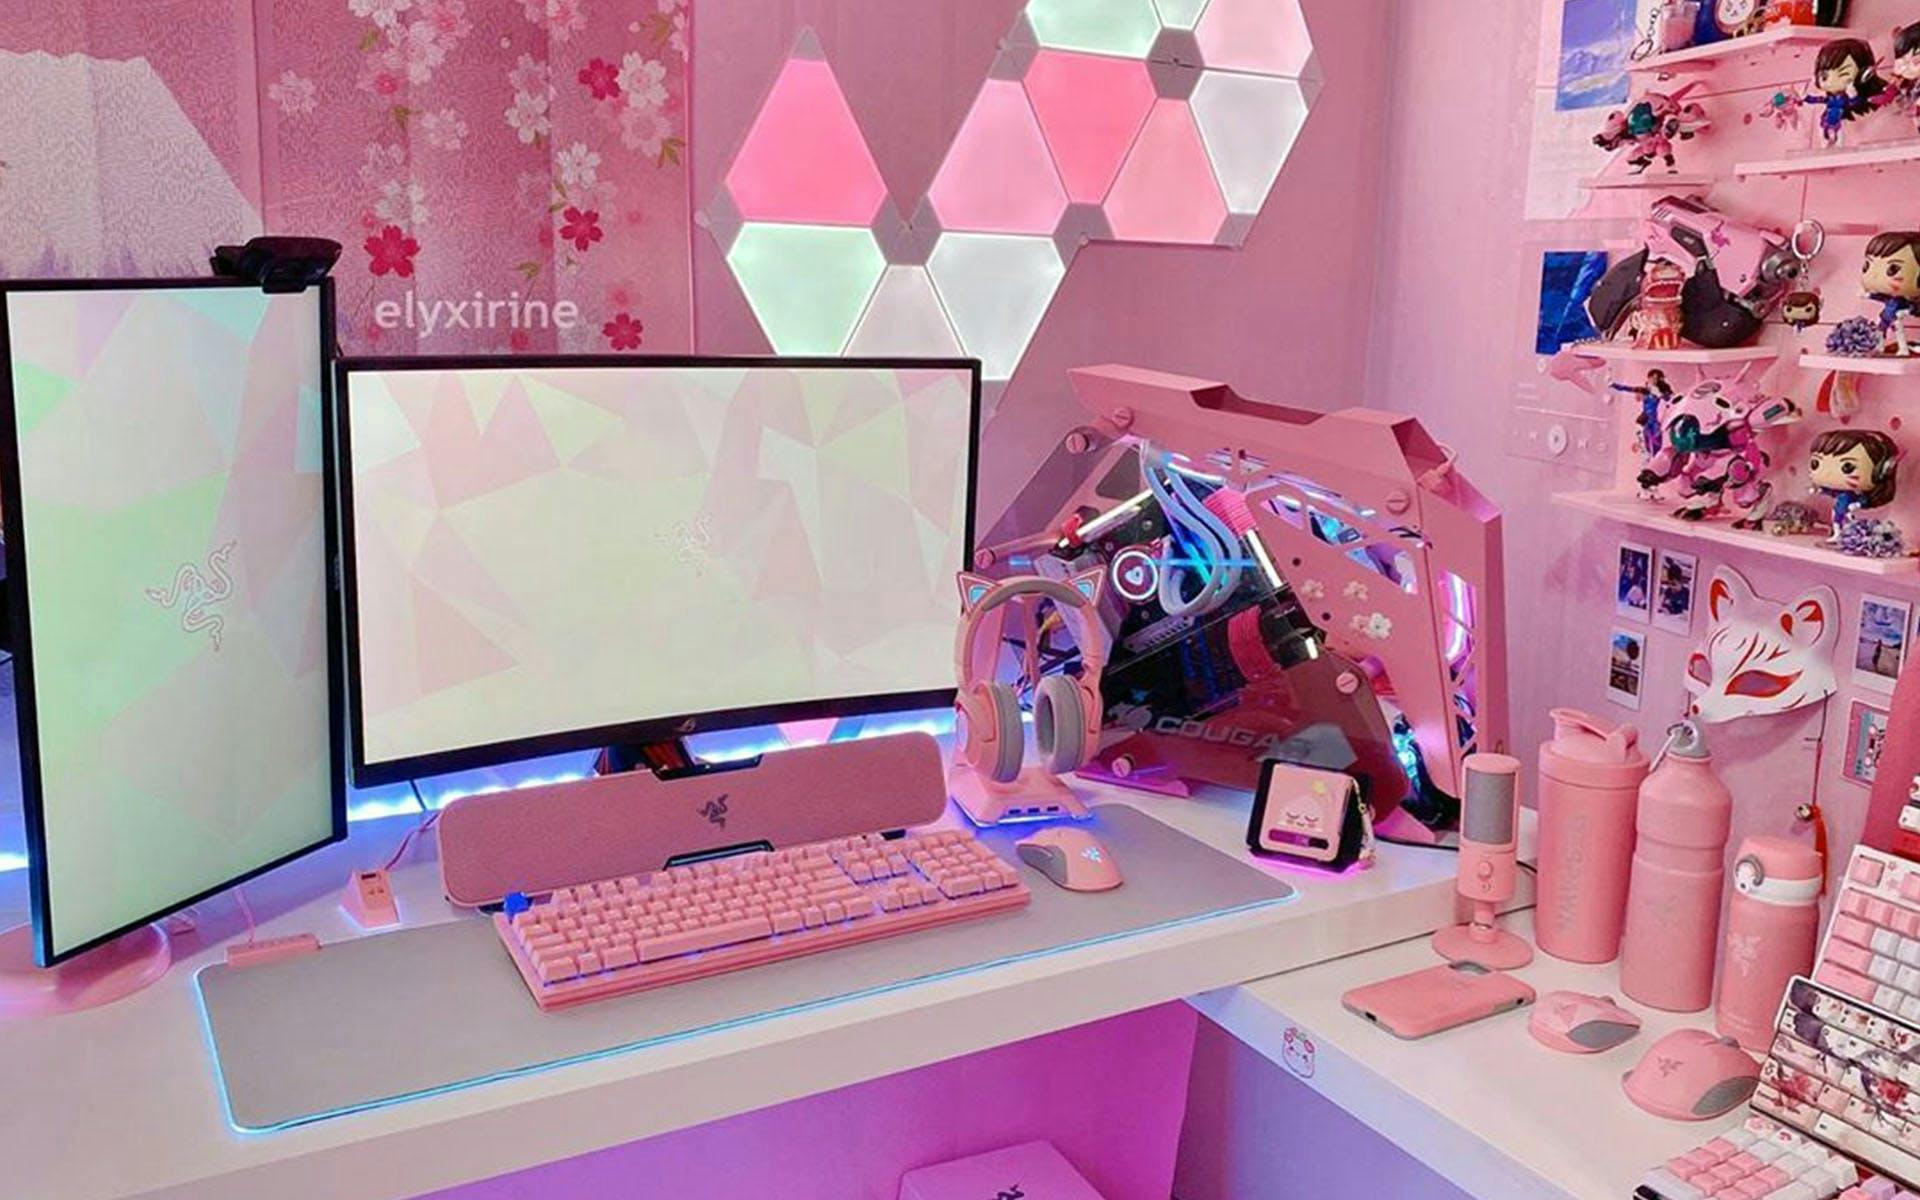 A pink dream of a gaming room | Credit: elyxirine